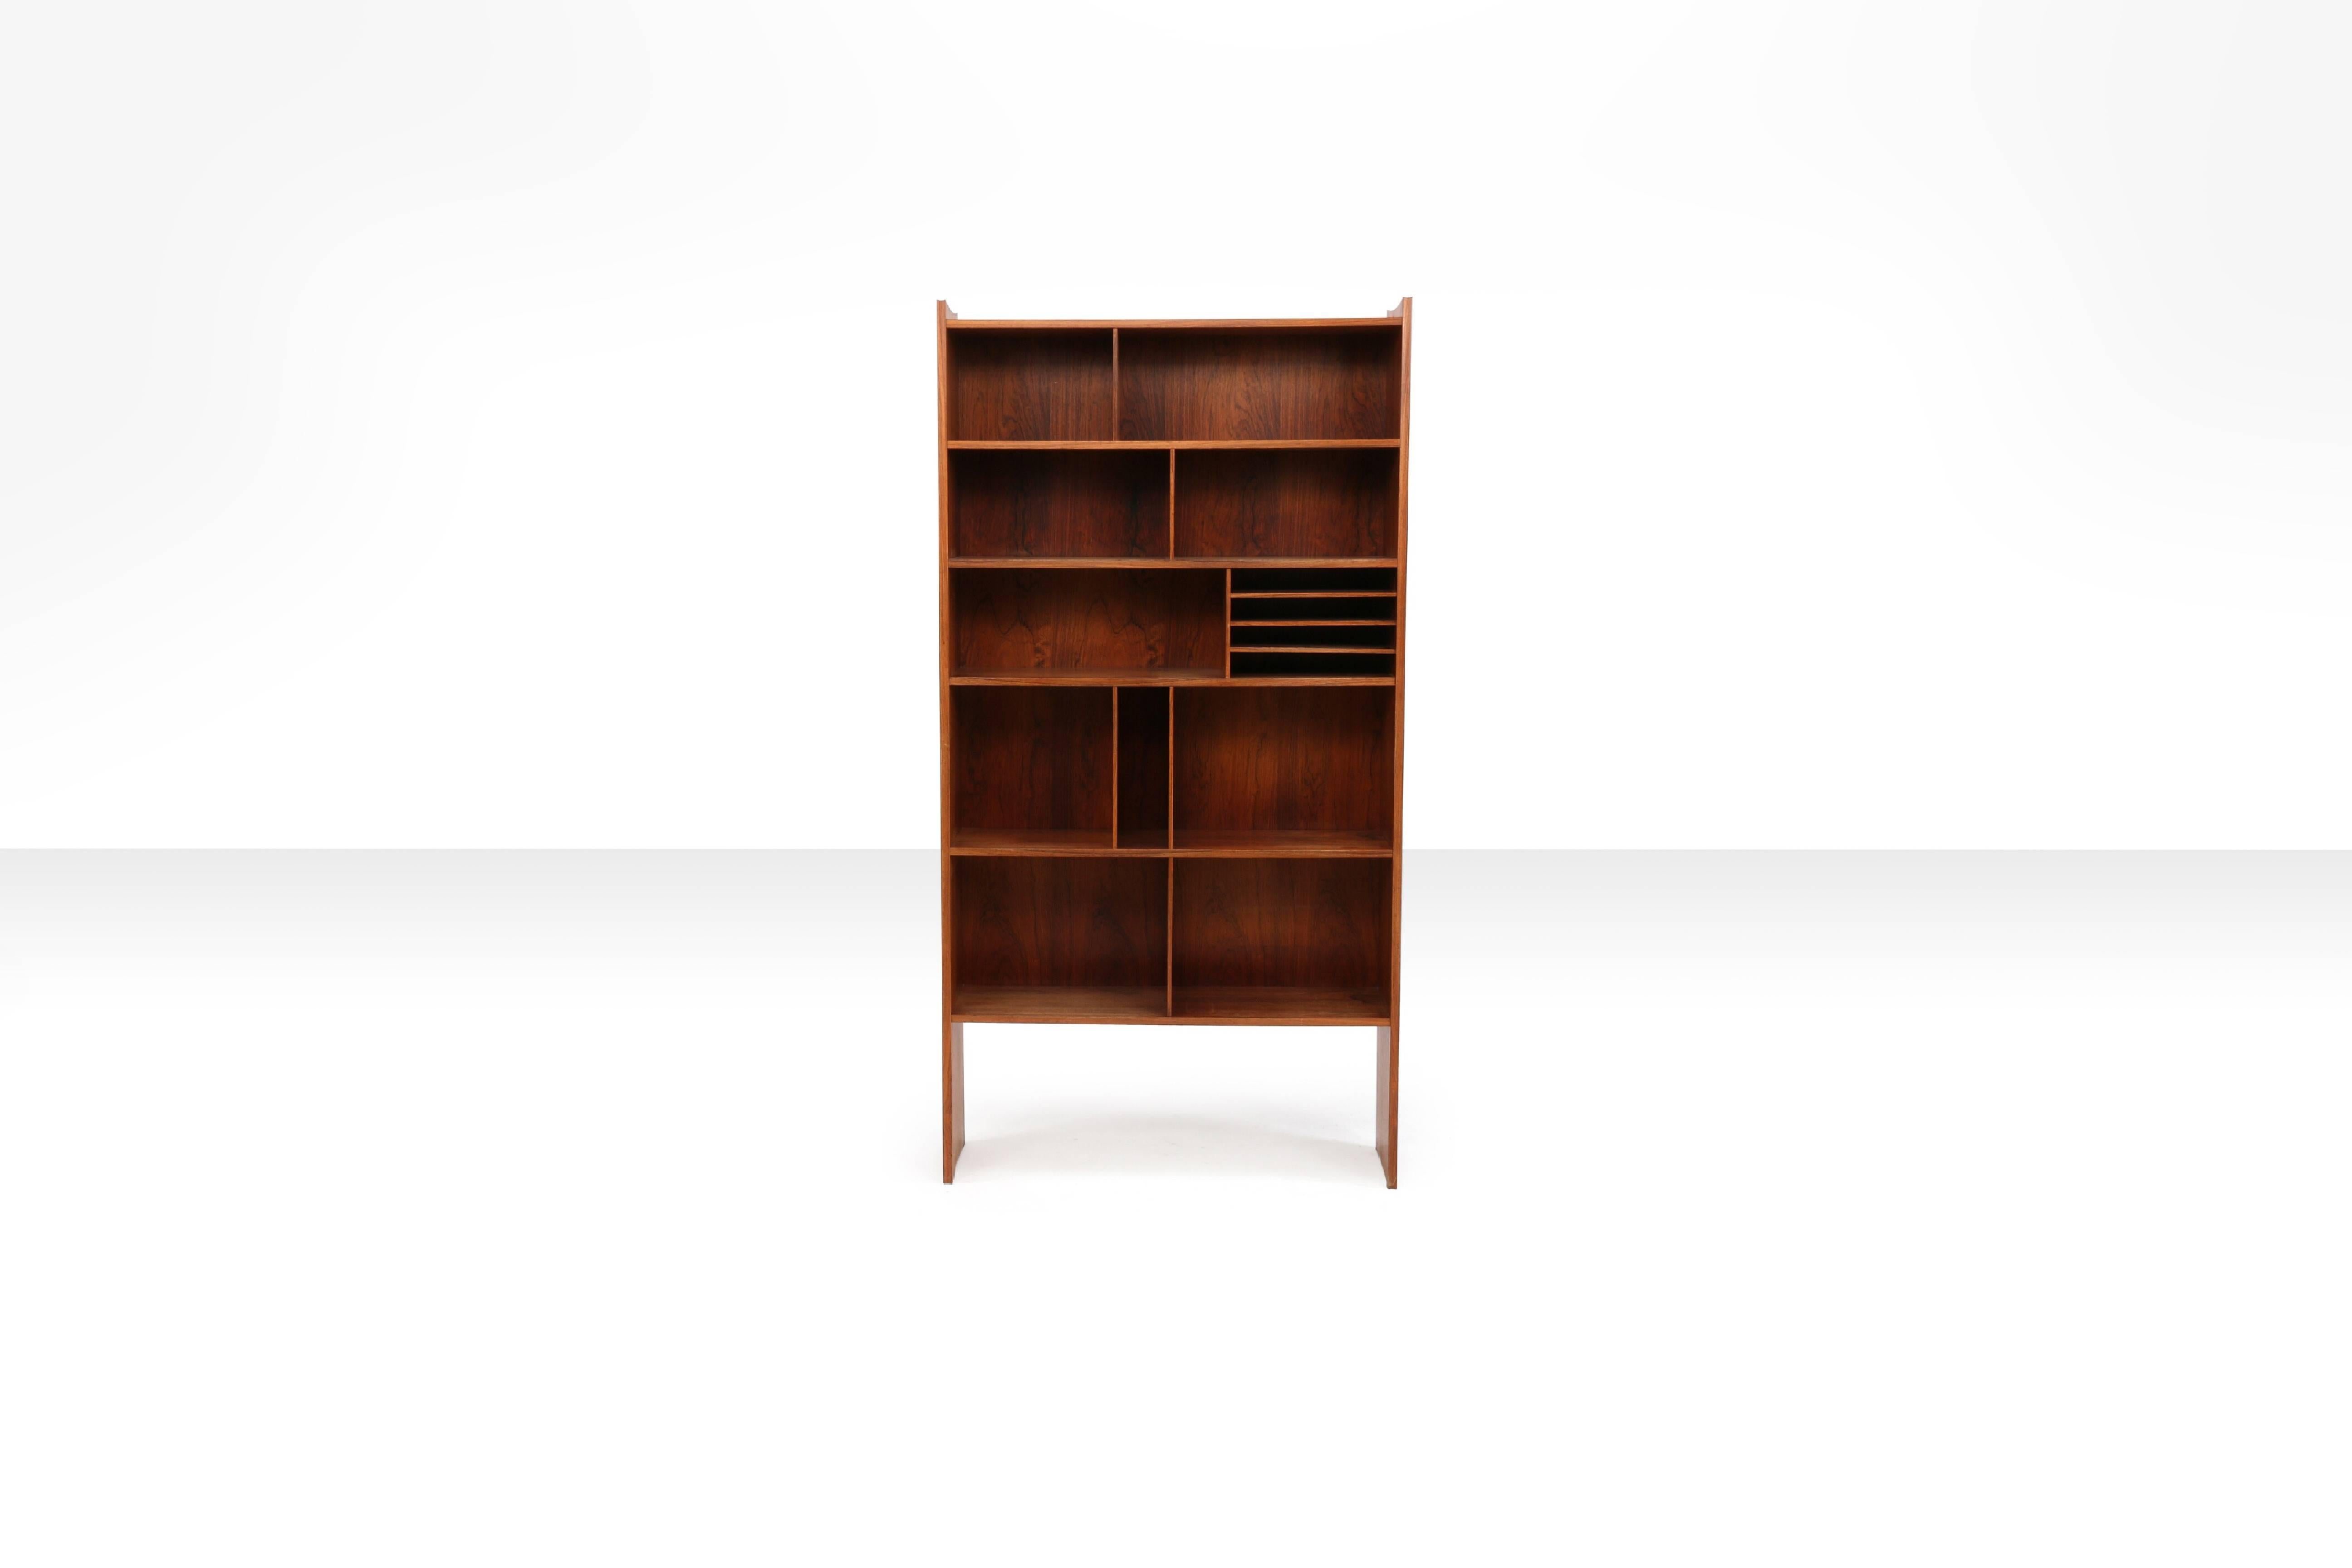 This rare bookcase was made early 1960s by cabinetmaker J.H. Johansens Eftf. v/ Henning Jensen and was presented at the Copenhagen Cabinetmakers' Guild Exhibition at the Designmuseum Denmark in 1961. 

Like a reviewer at the time wrote: 